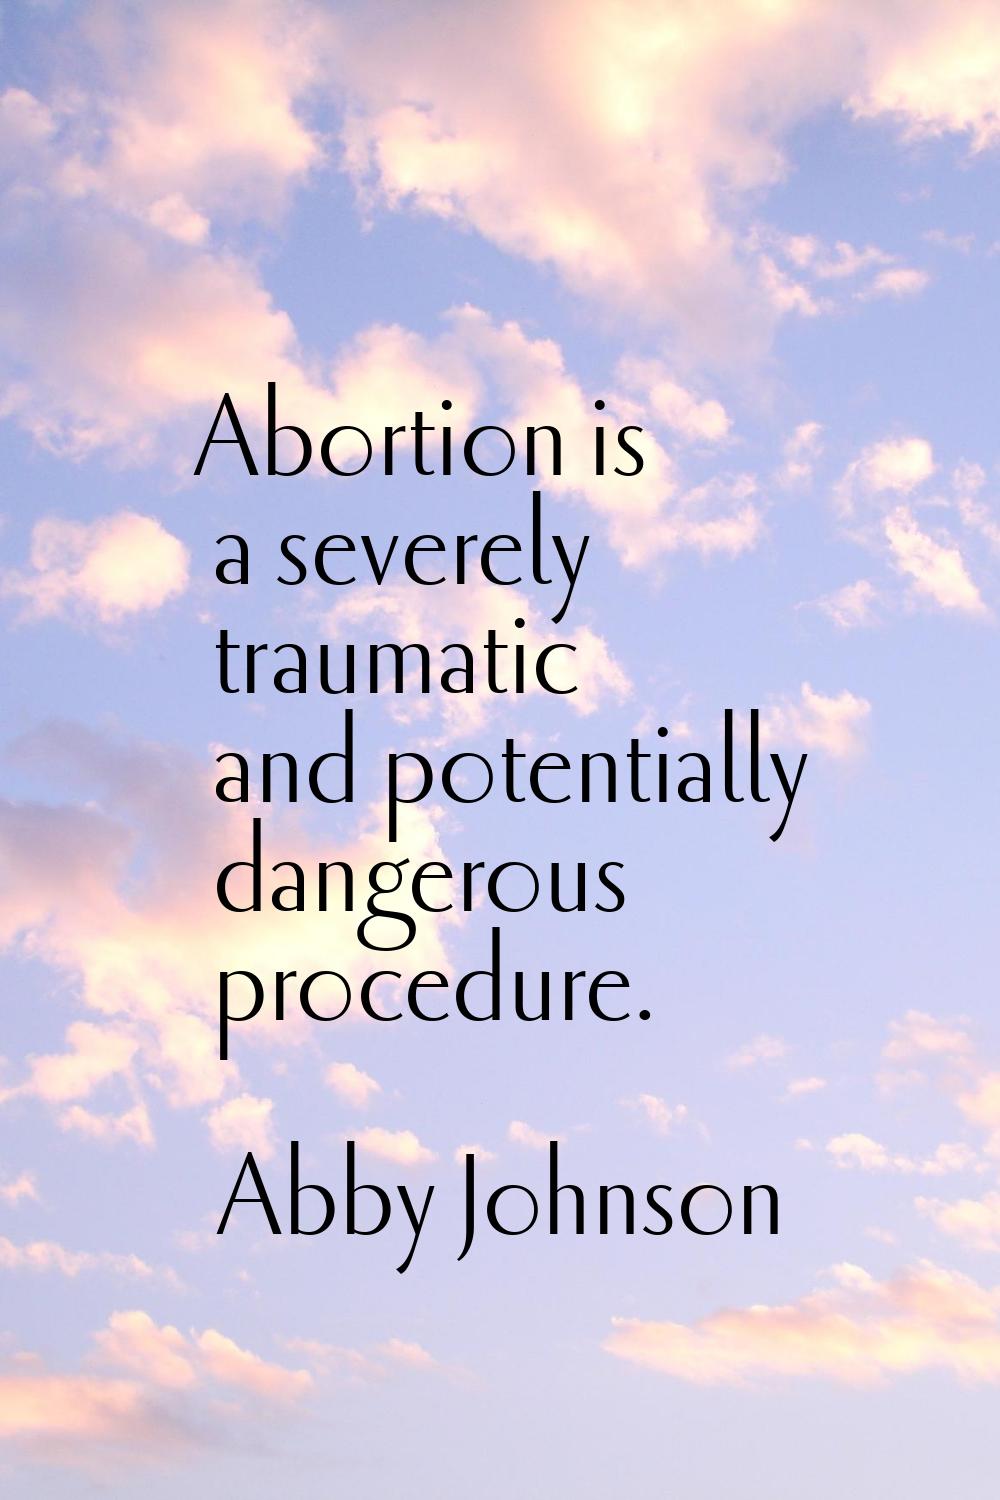 Abortion is a severely traumatic and potentially dangerous procedure.